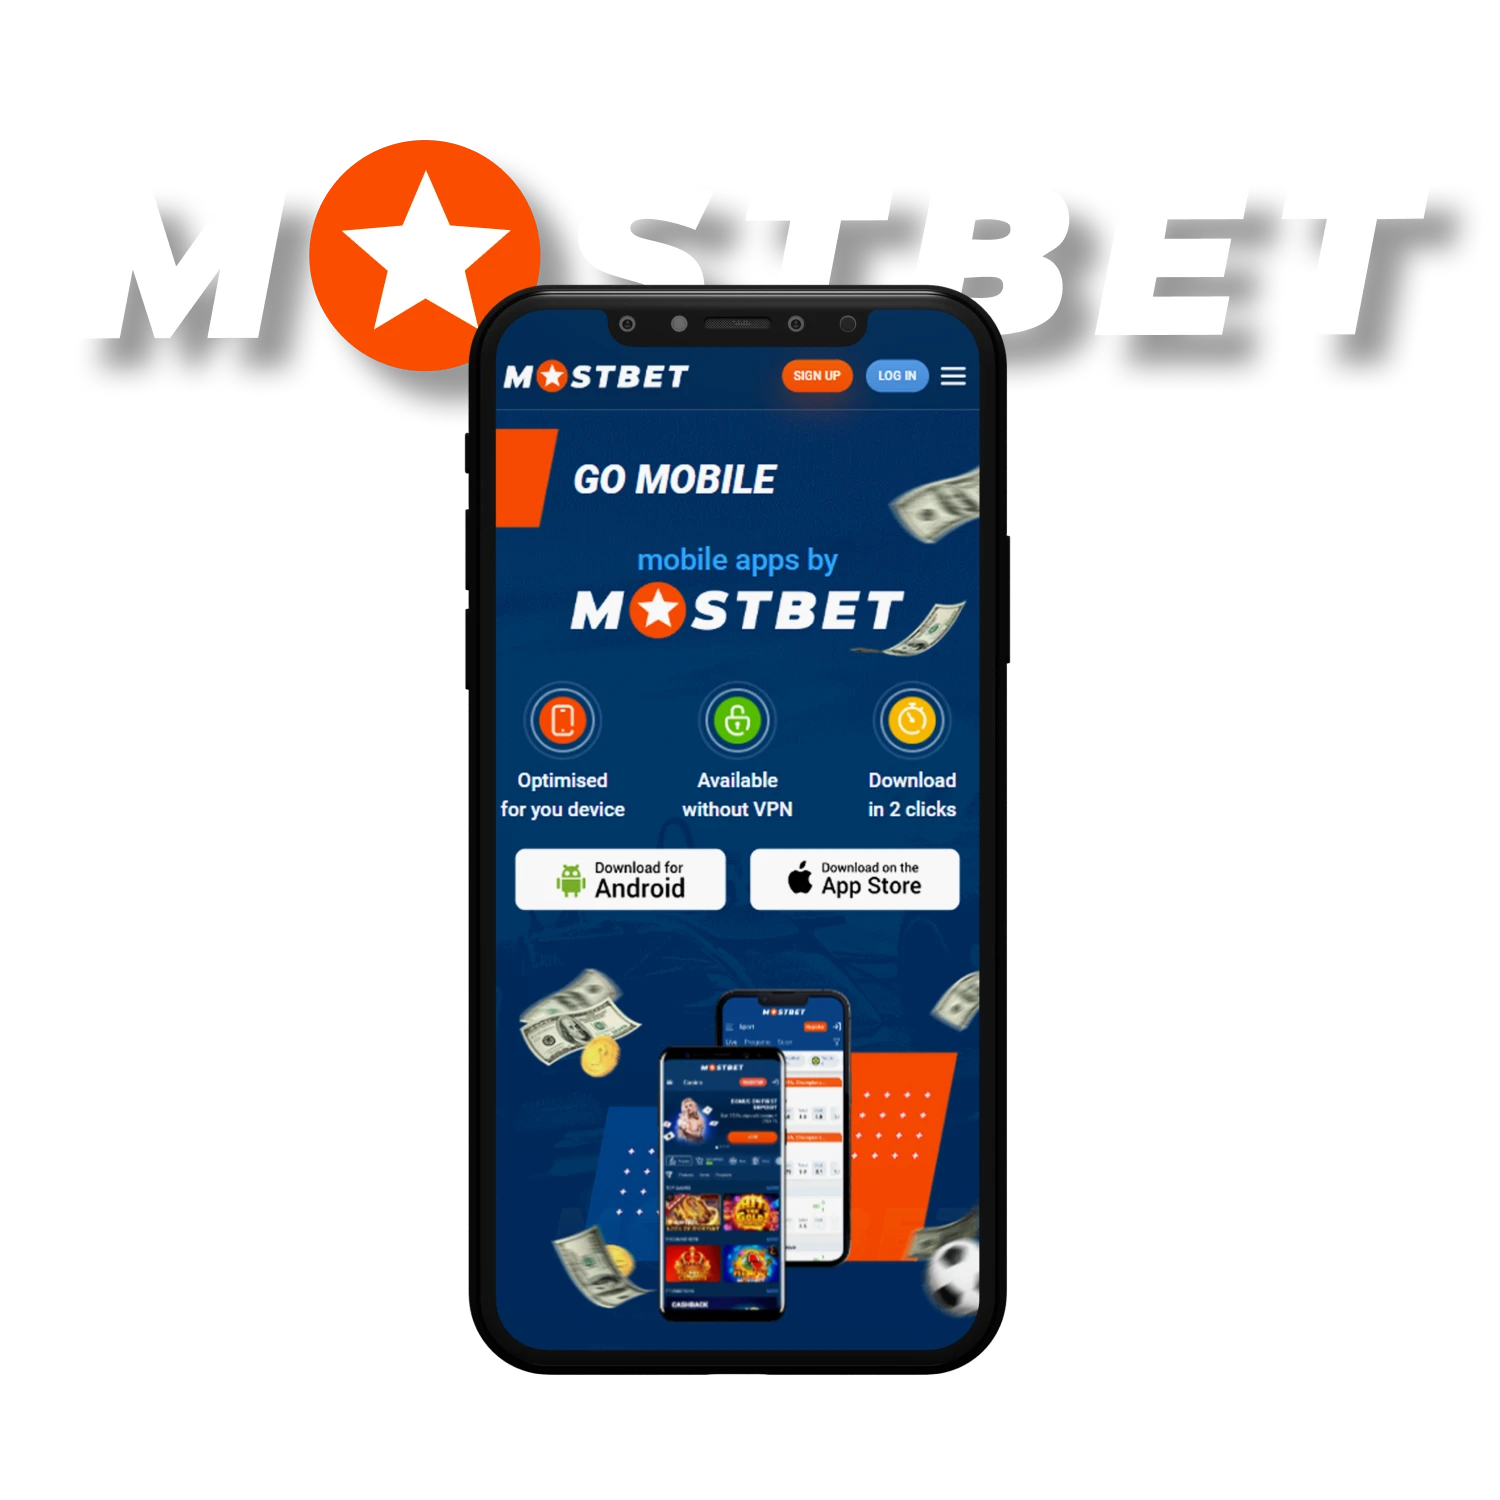 Best Mostbet BD-2 Betting Company and Online Casino in Bangladesh Android/iPhone Apps